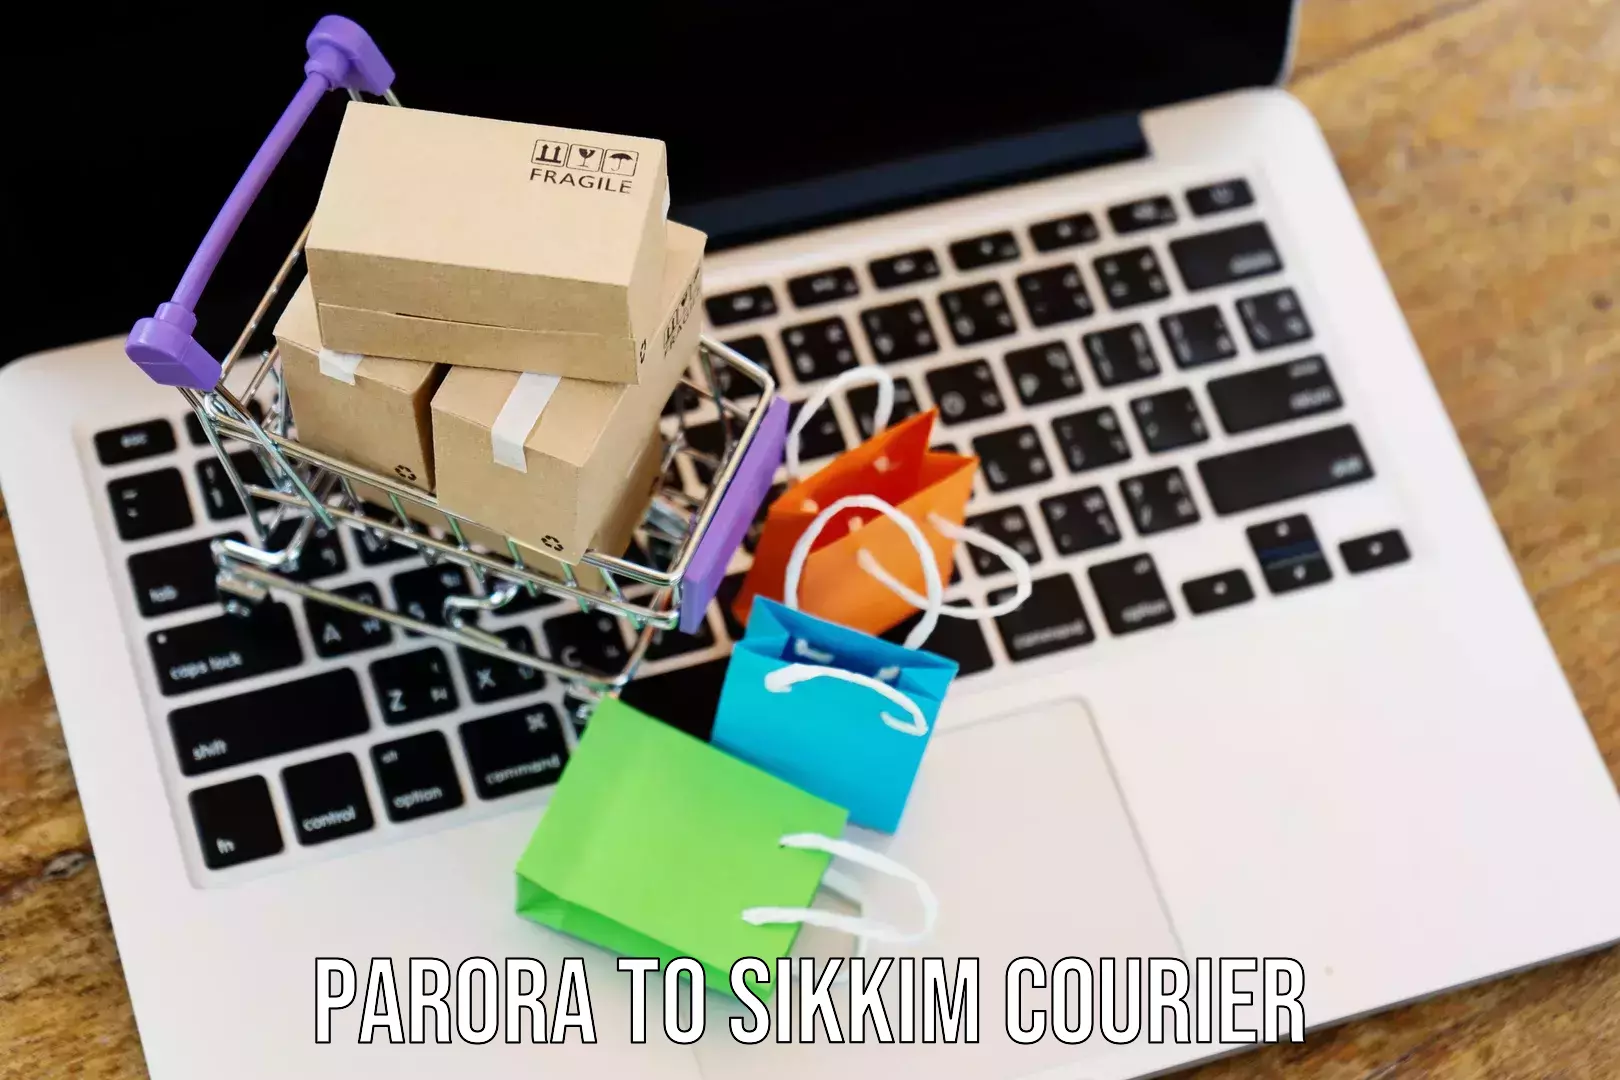 Cost-effective courier options Parora to Pelling